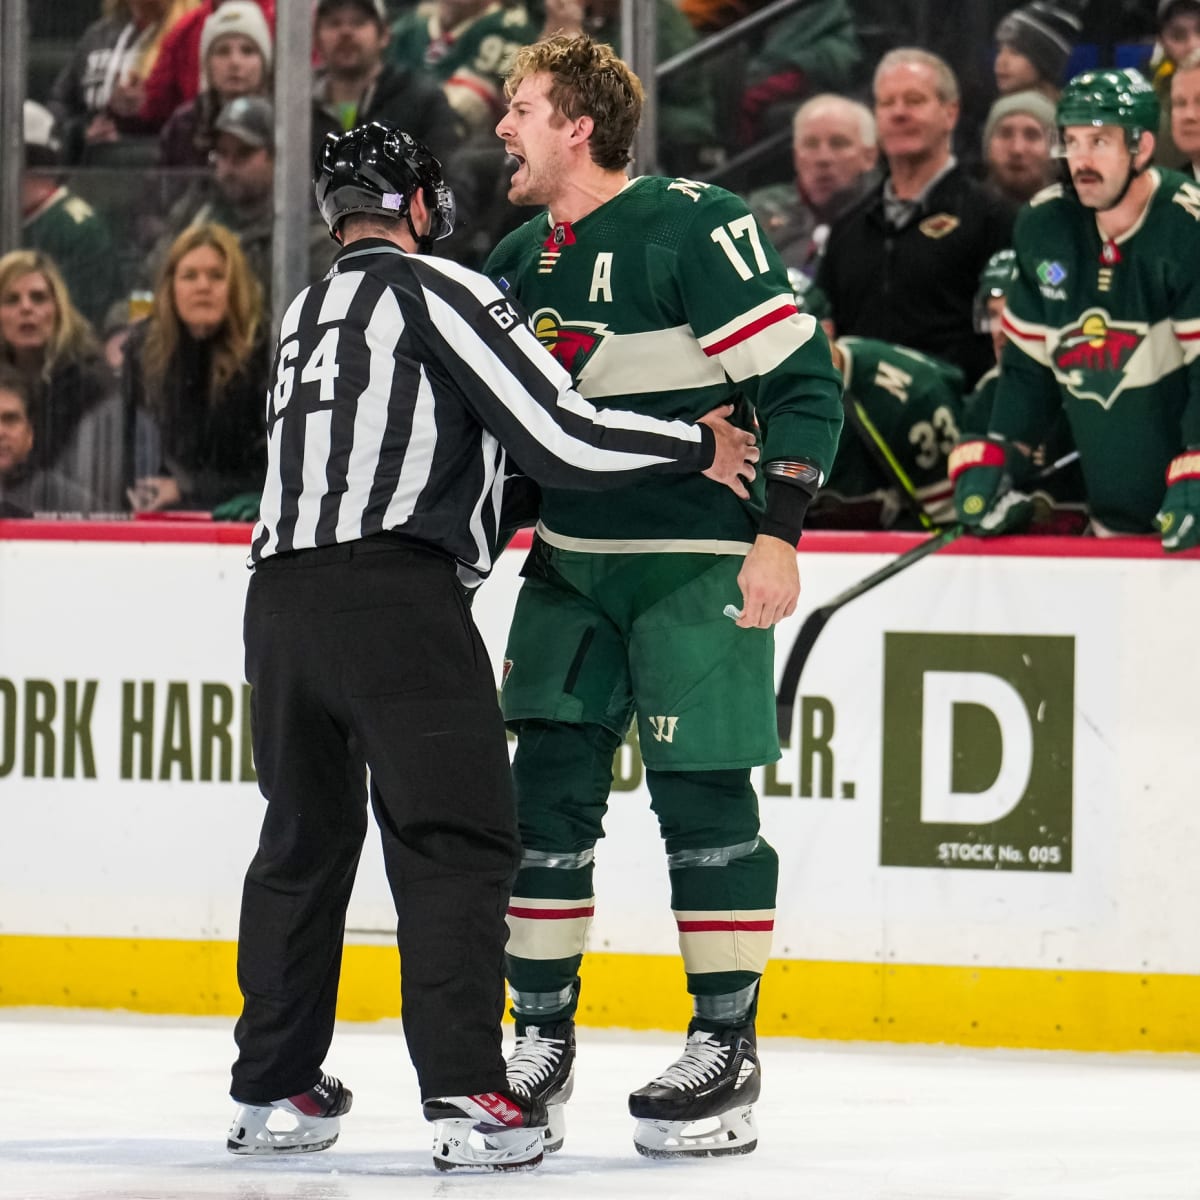 Wild's Foligno describes questionable penalties in loss to Stars